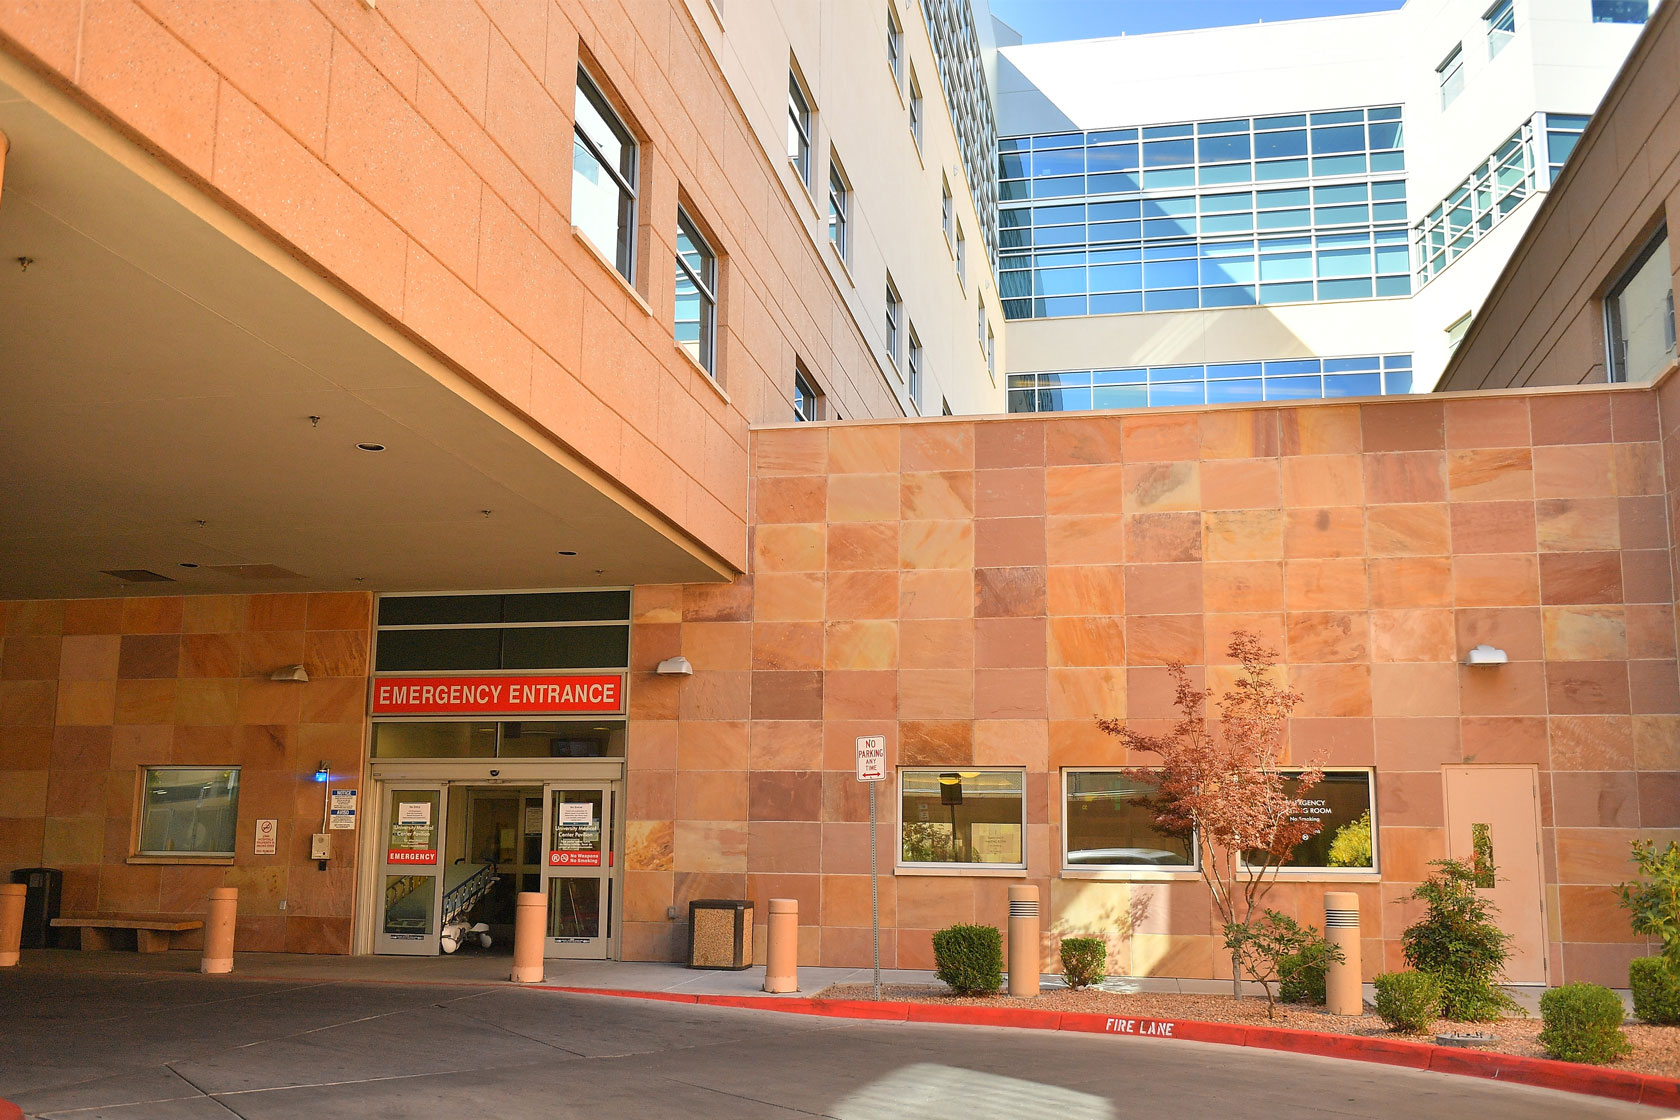 Photo shows an exterior view of a tan-colored hospital